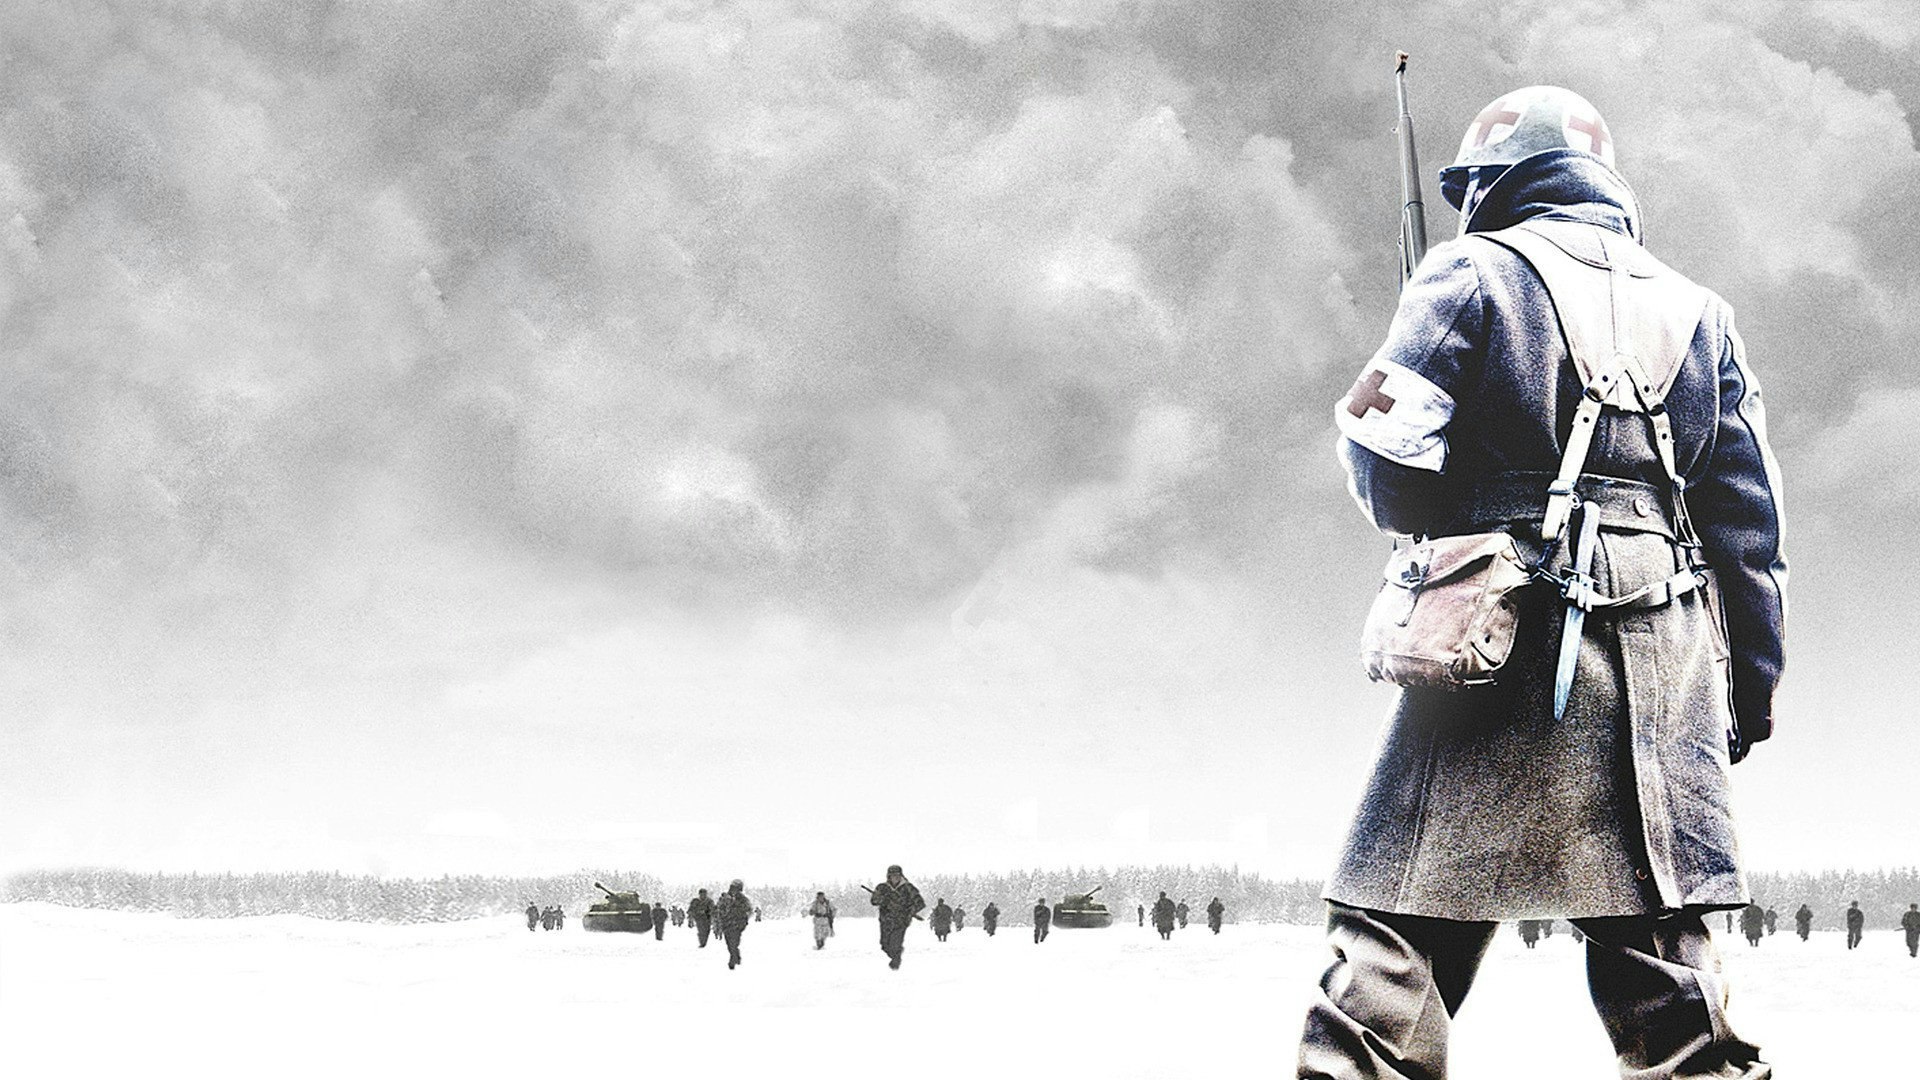 saints and soldiers wallpaper